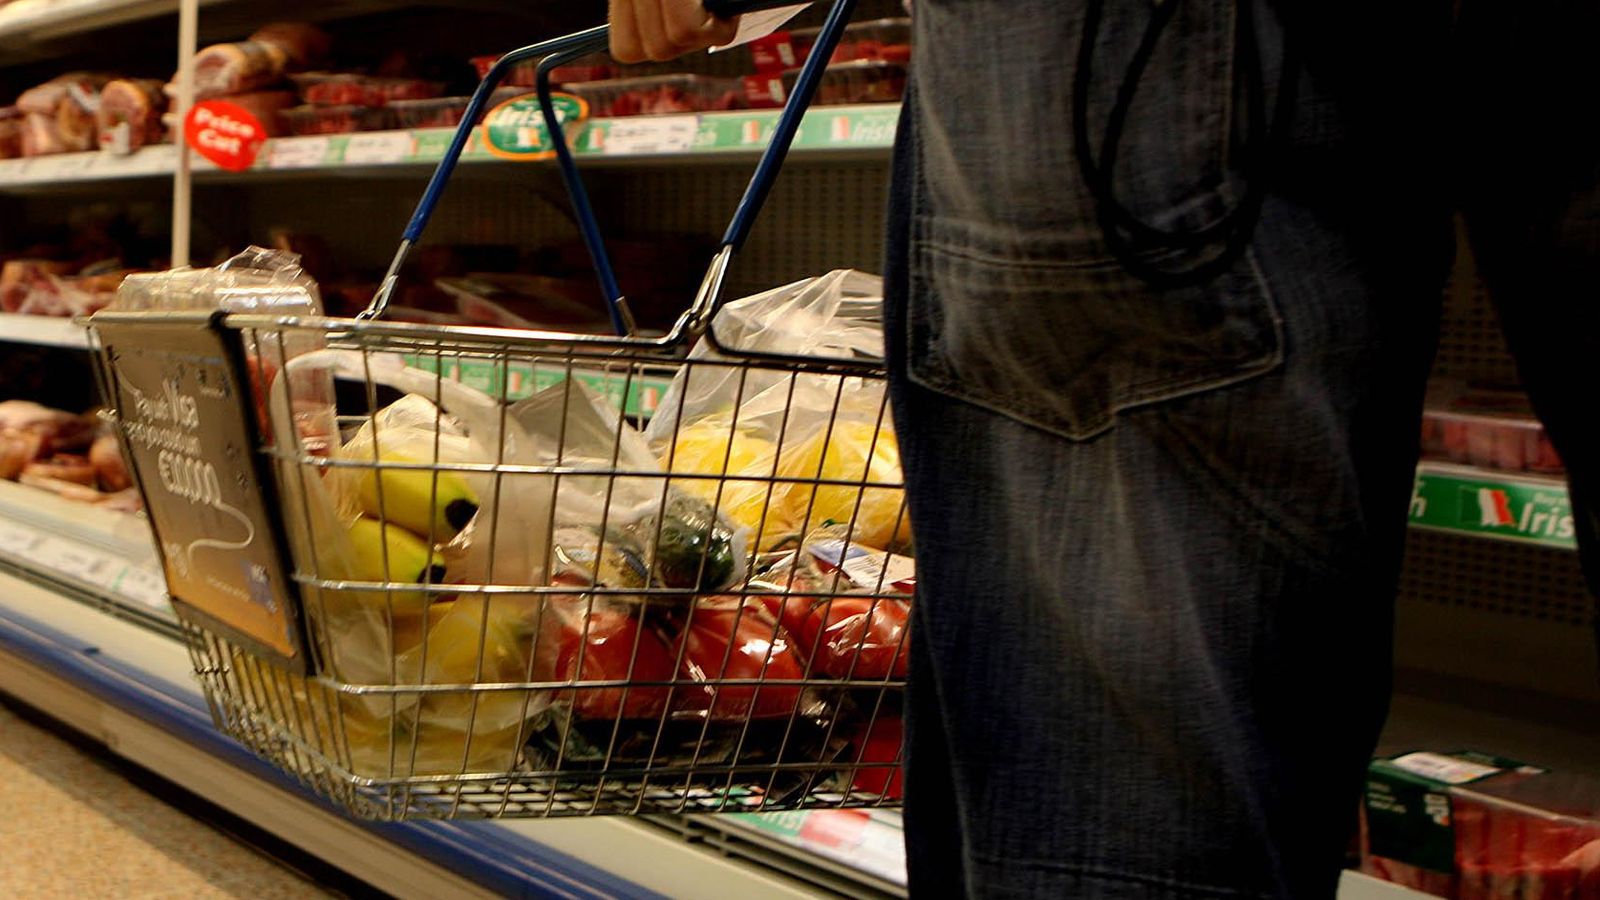 Cost of living: Household grocery bills 'rise by almost £40' in a month